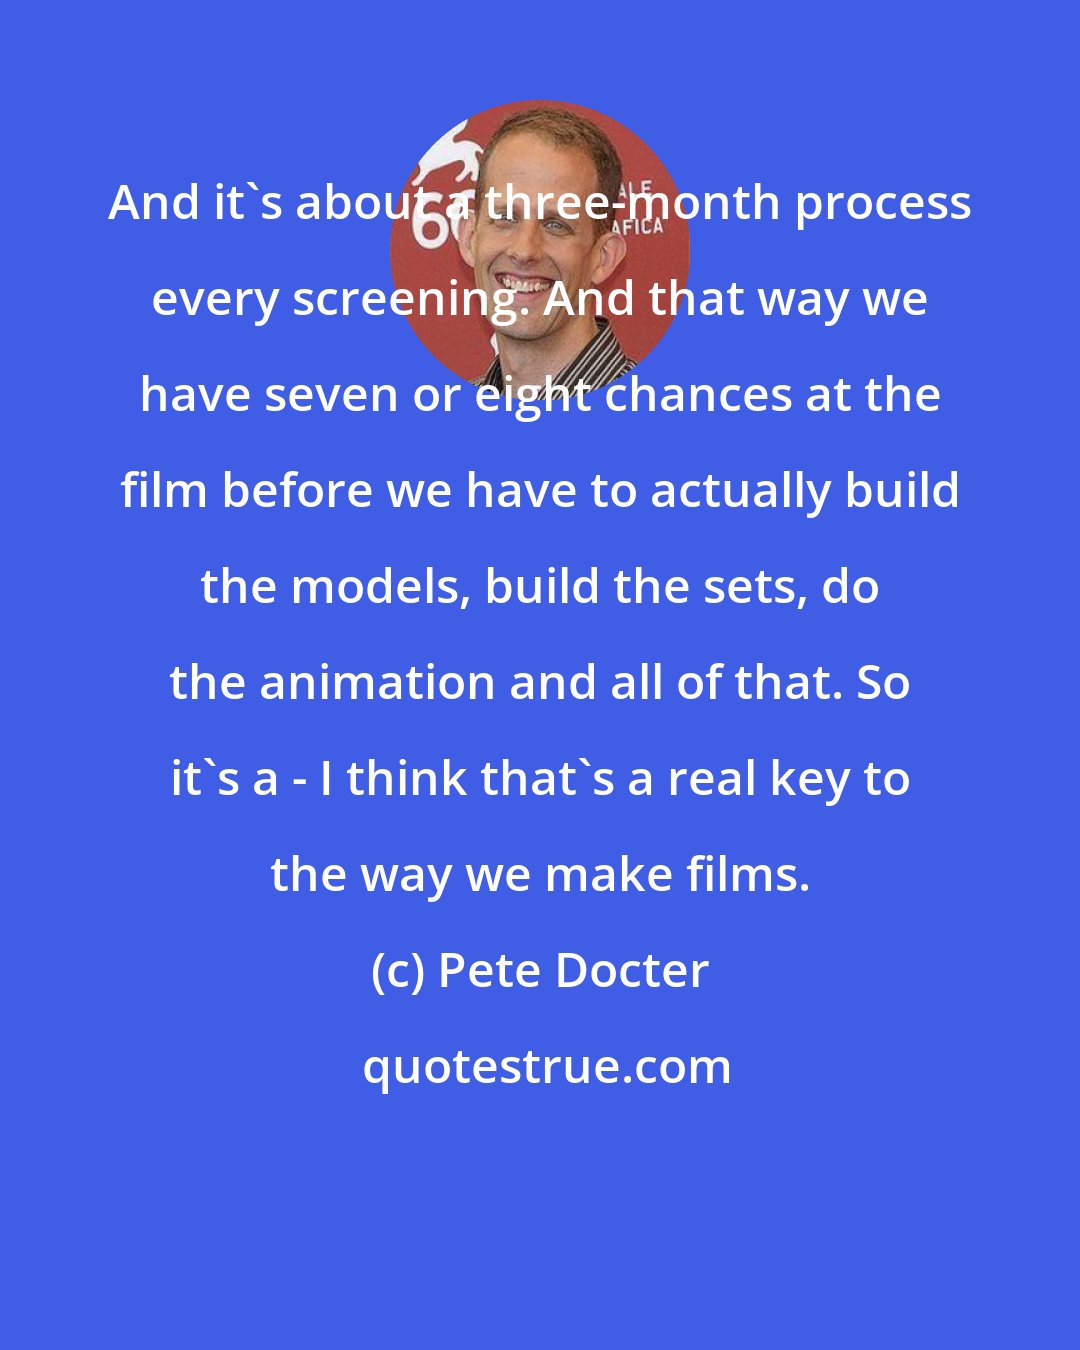 Pete Docter: And it's about a three-month process every screening. And that way we have seven or eight chances at the film before we have to actually build the models, build the sets, do the animation and all of that. So it's a - I think that's a real key to the way we make films.